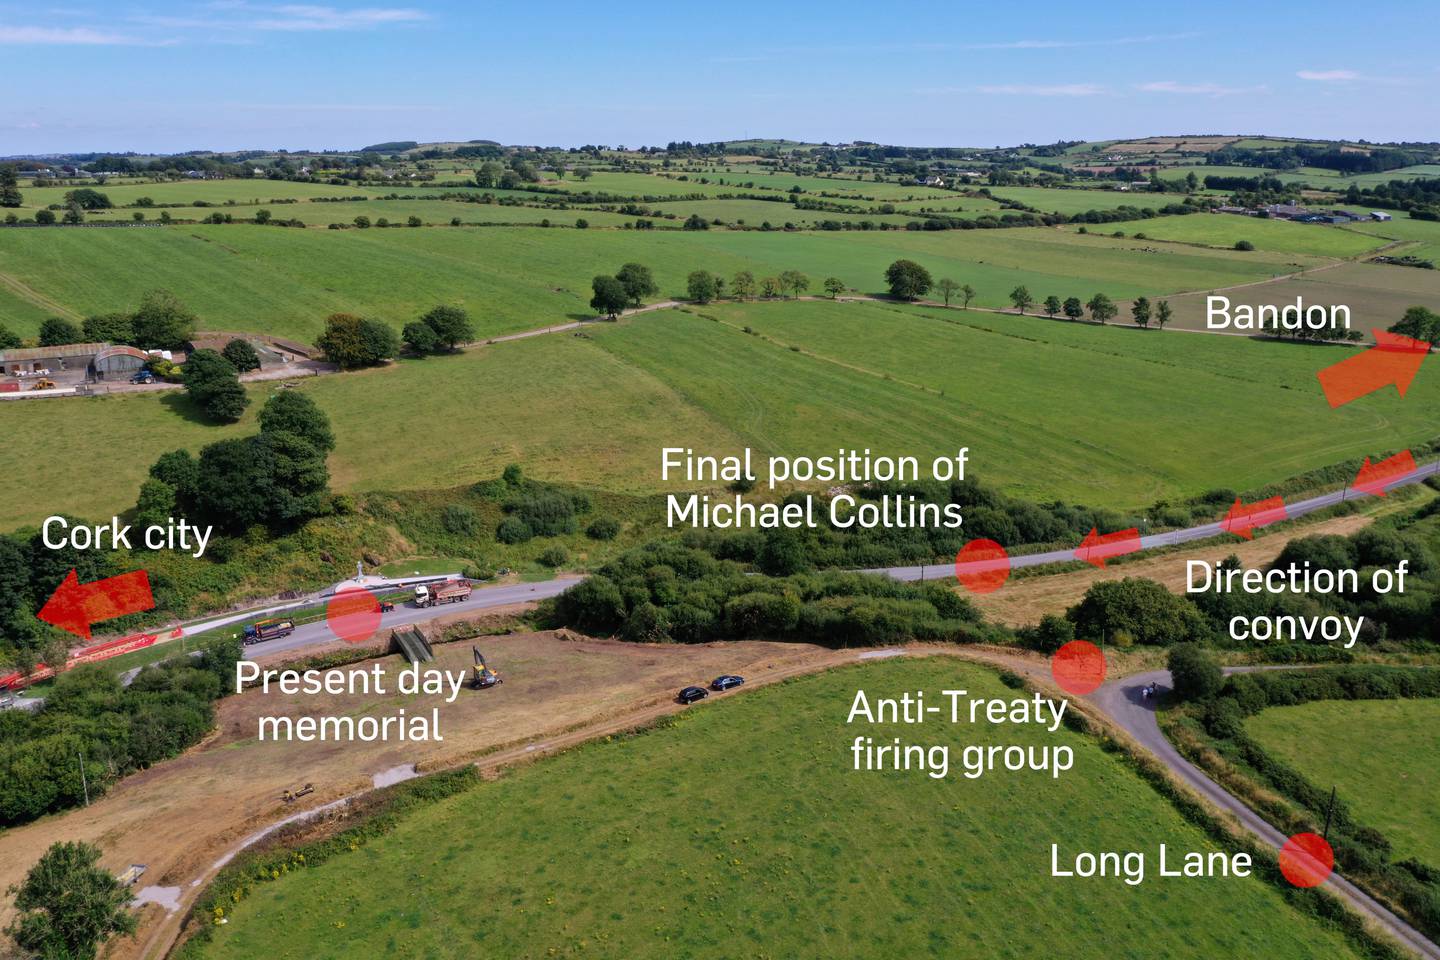 Graphic of Béal na Bláth where Michael Collins was fatally shot 100 years ago